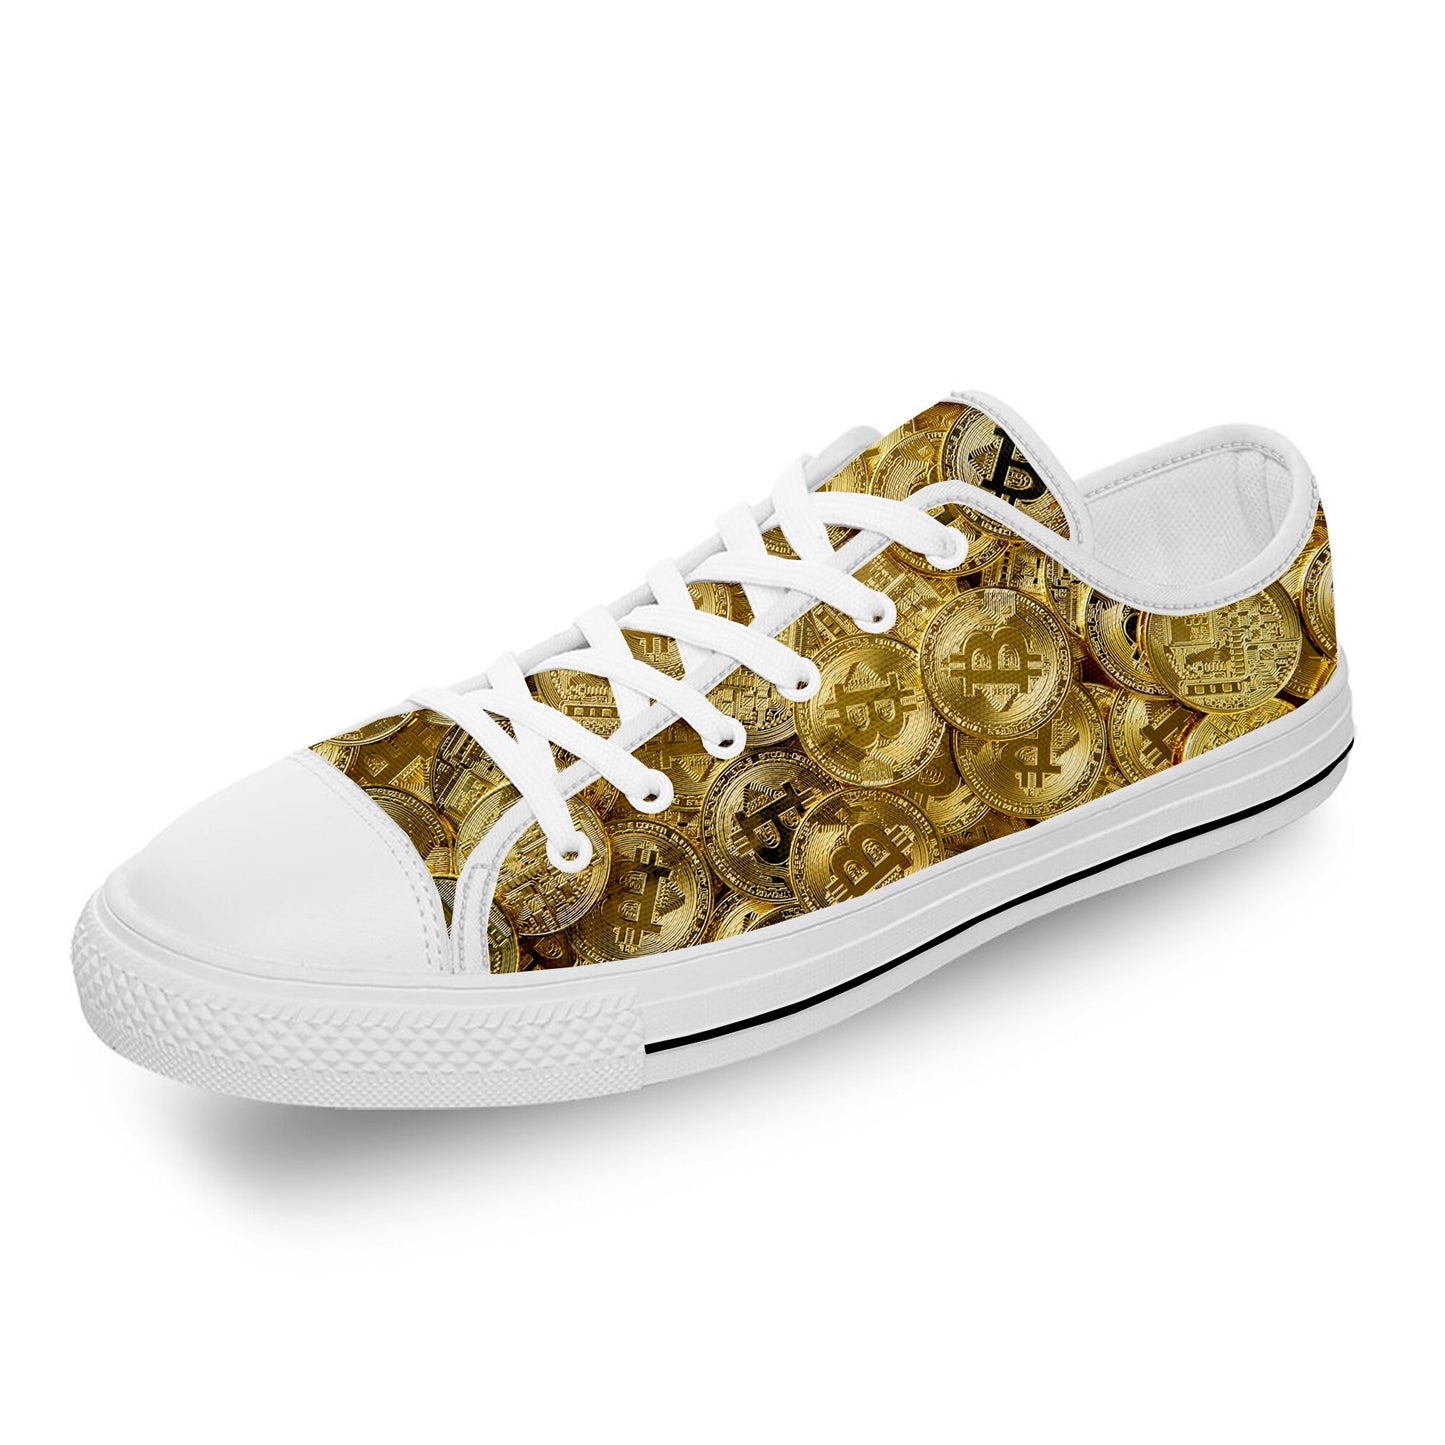 Bitcoin cryptocurrency shoes